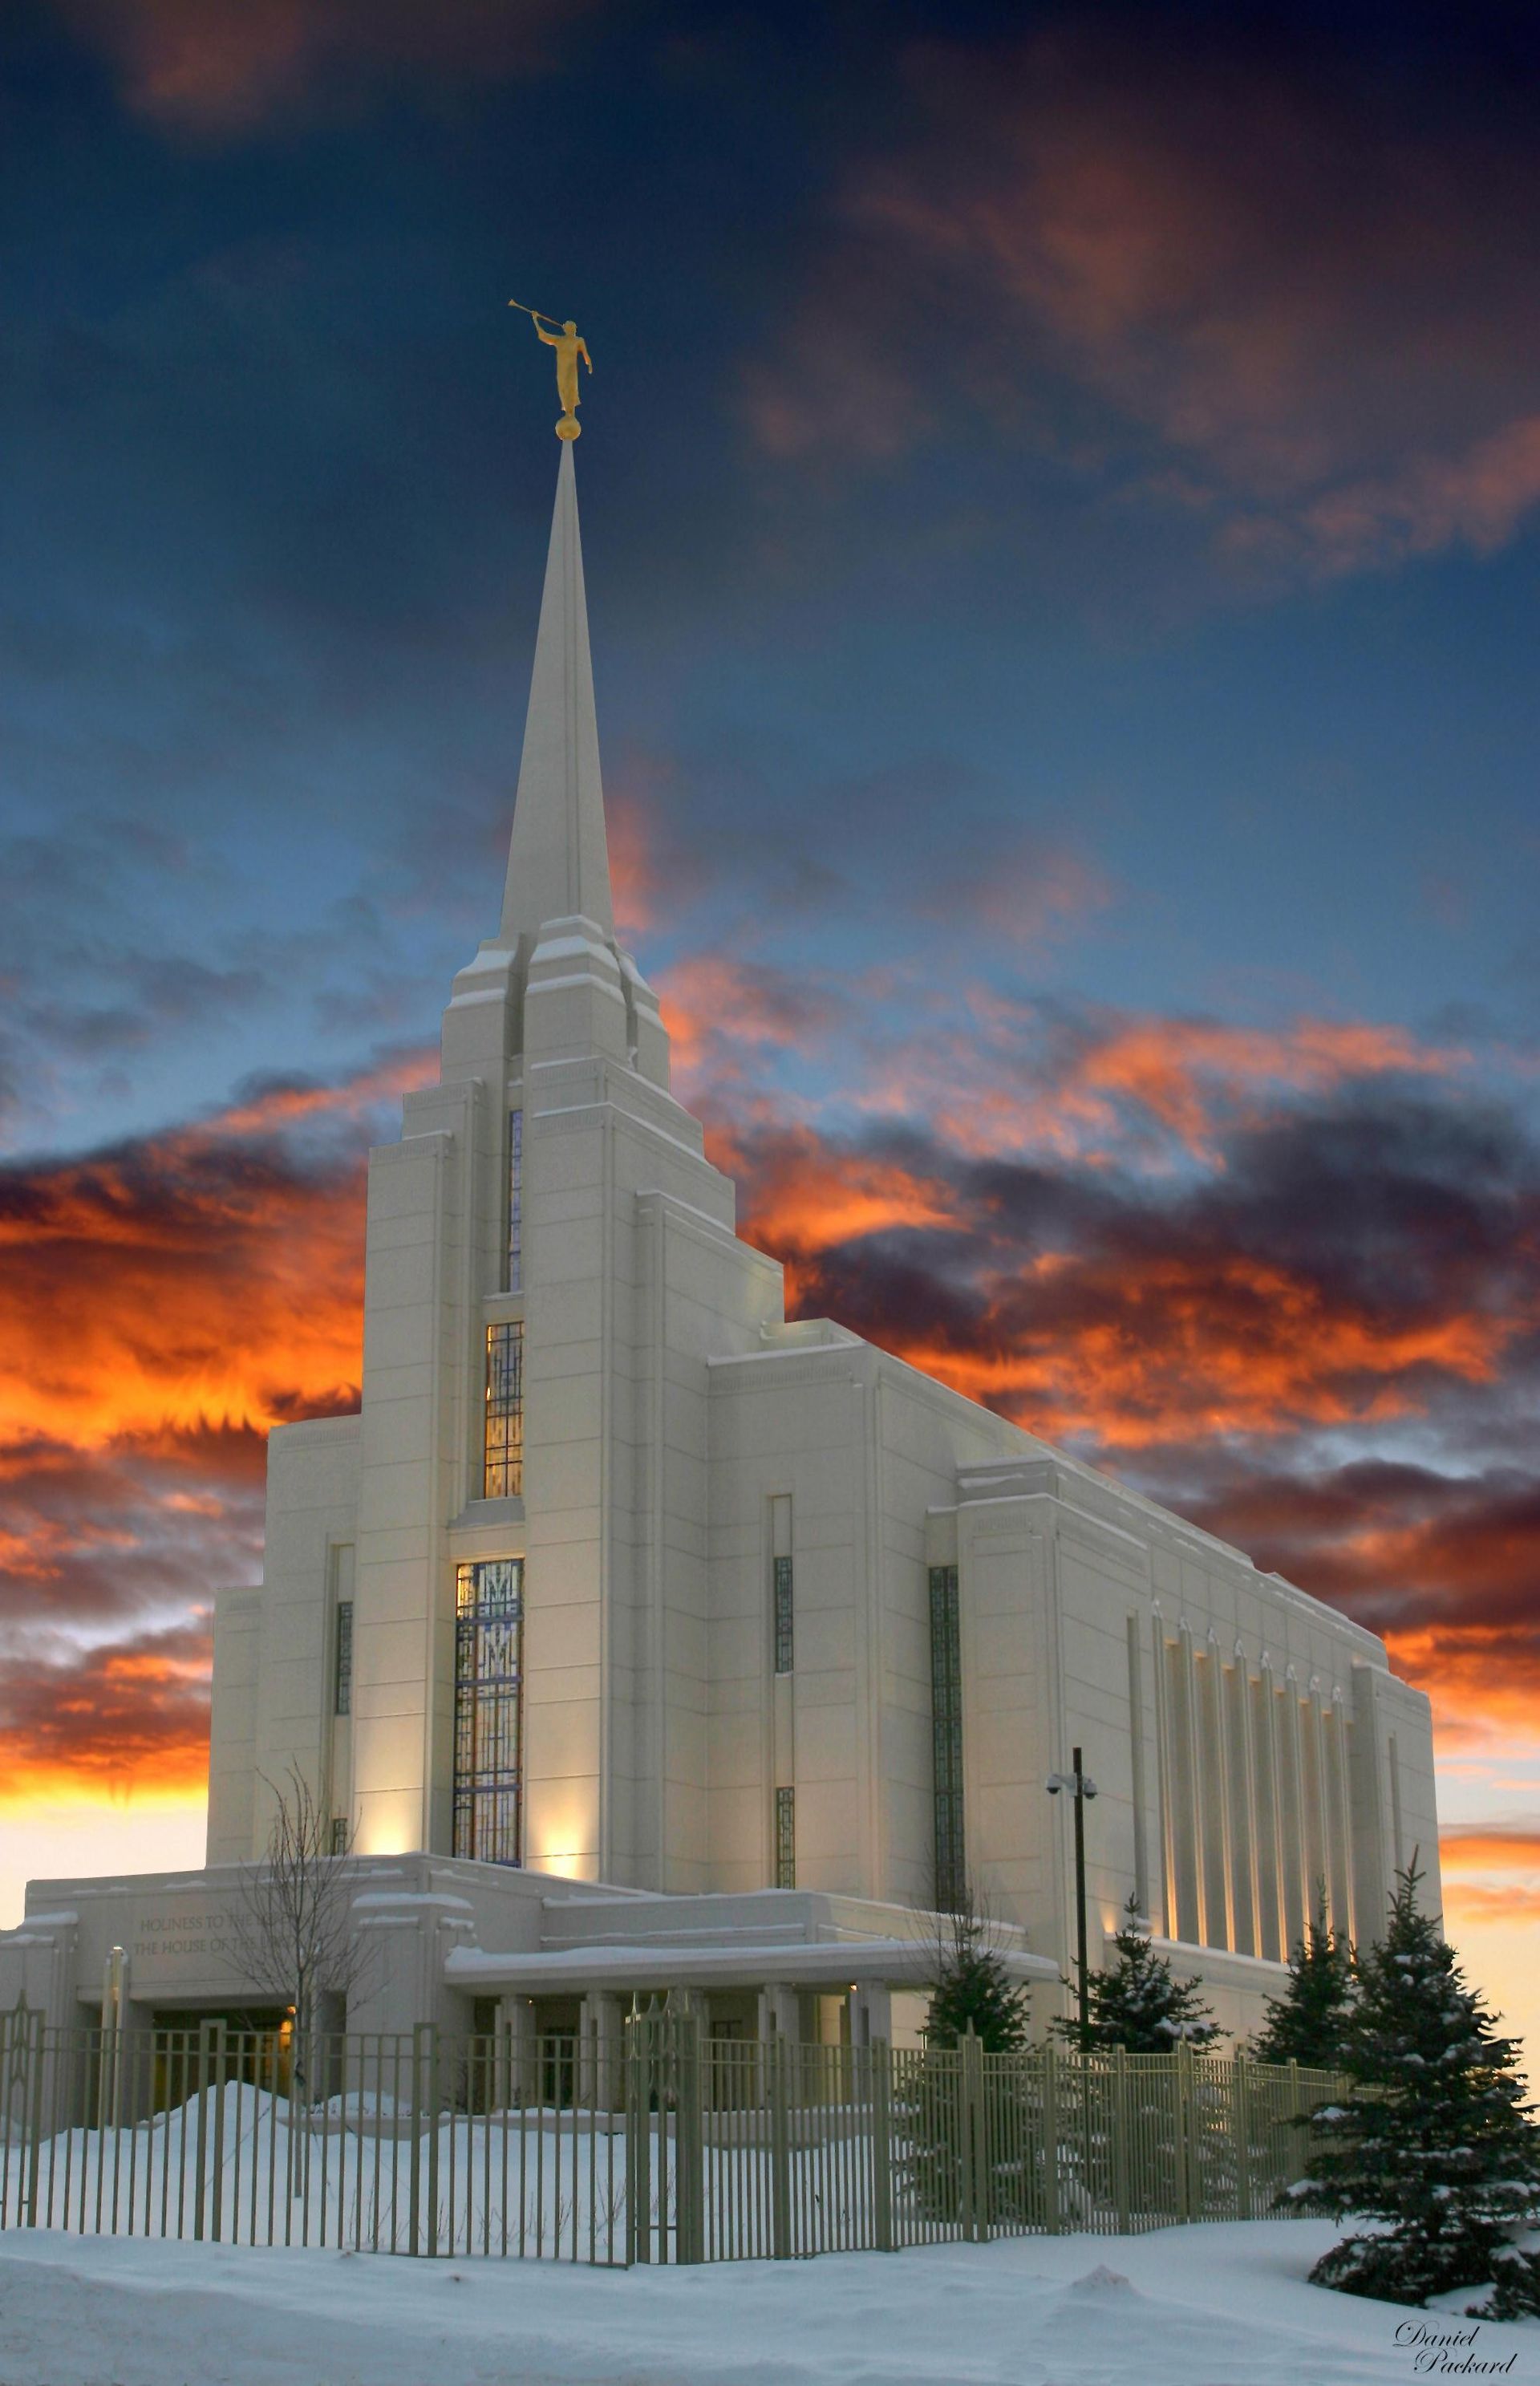 The Rexburg Idaho Temple at sunset during winter, including the entrance and scenery.